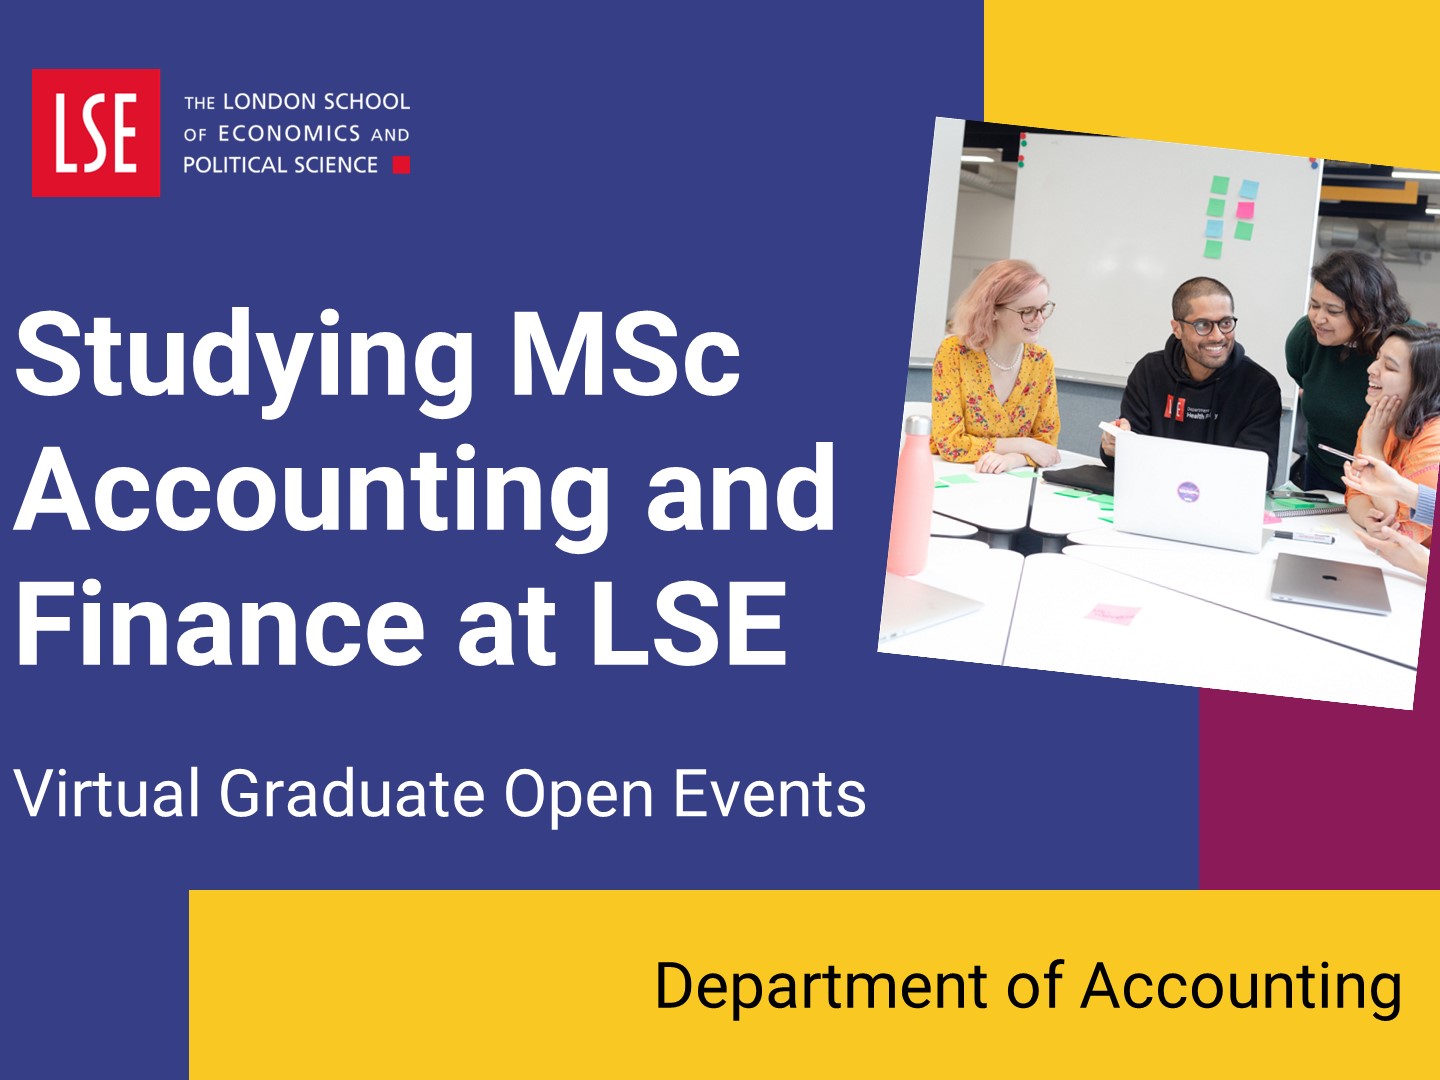 Studying MSc Accounting and Finance at LSE